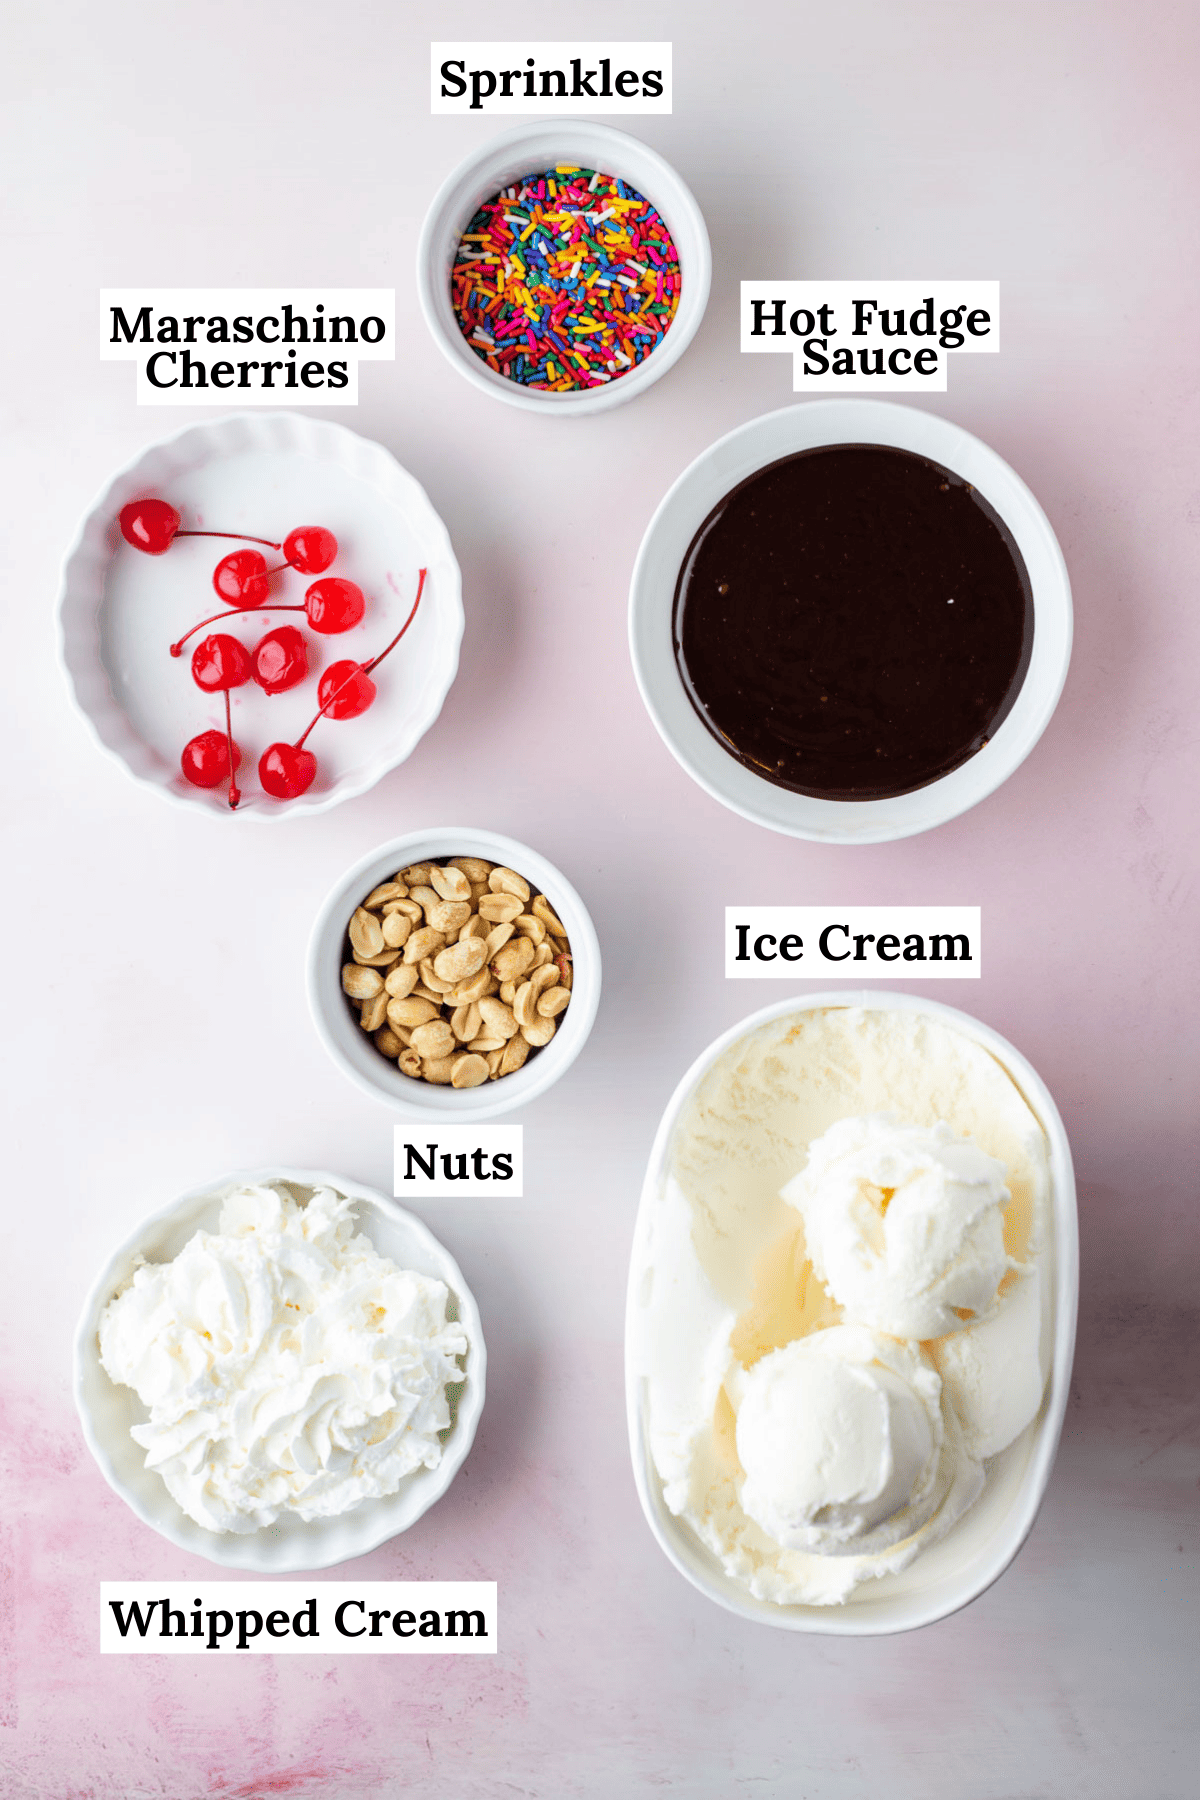 the ingredients for a hot fudge sundae laid out including a bowl of sprinkles, a bowl of hot fudge sauce, a bowl of maraschino cherries, a bowl of peanuts, a bowl of whipped cream and a bowl of vanilla ice cream